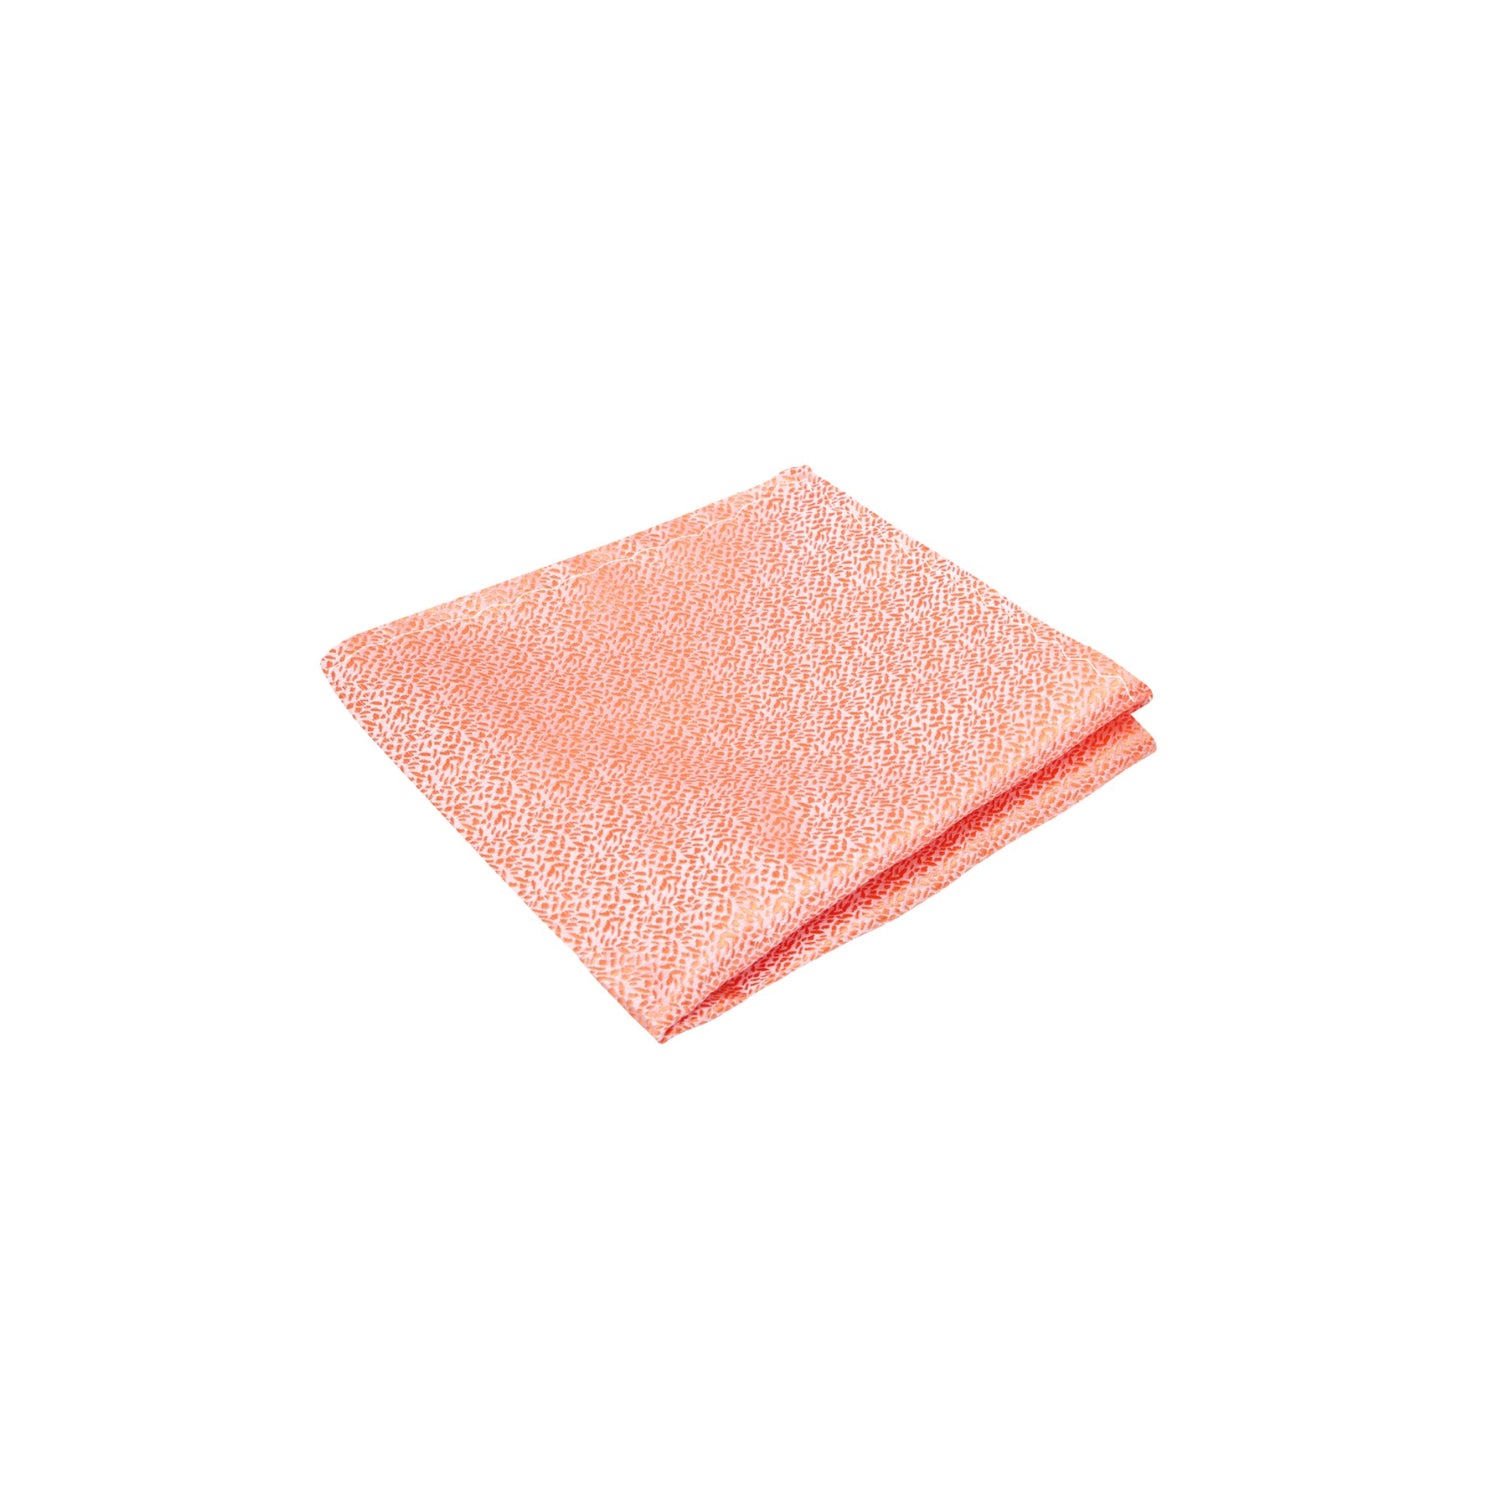 Coral Texture Pocket Square